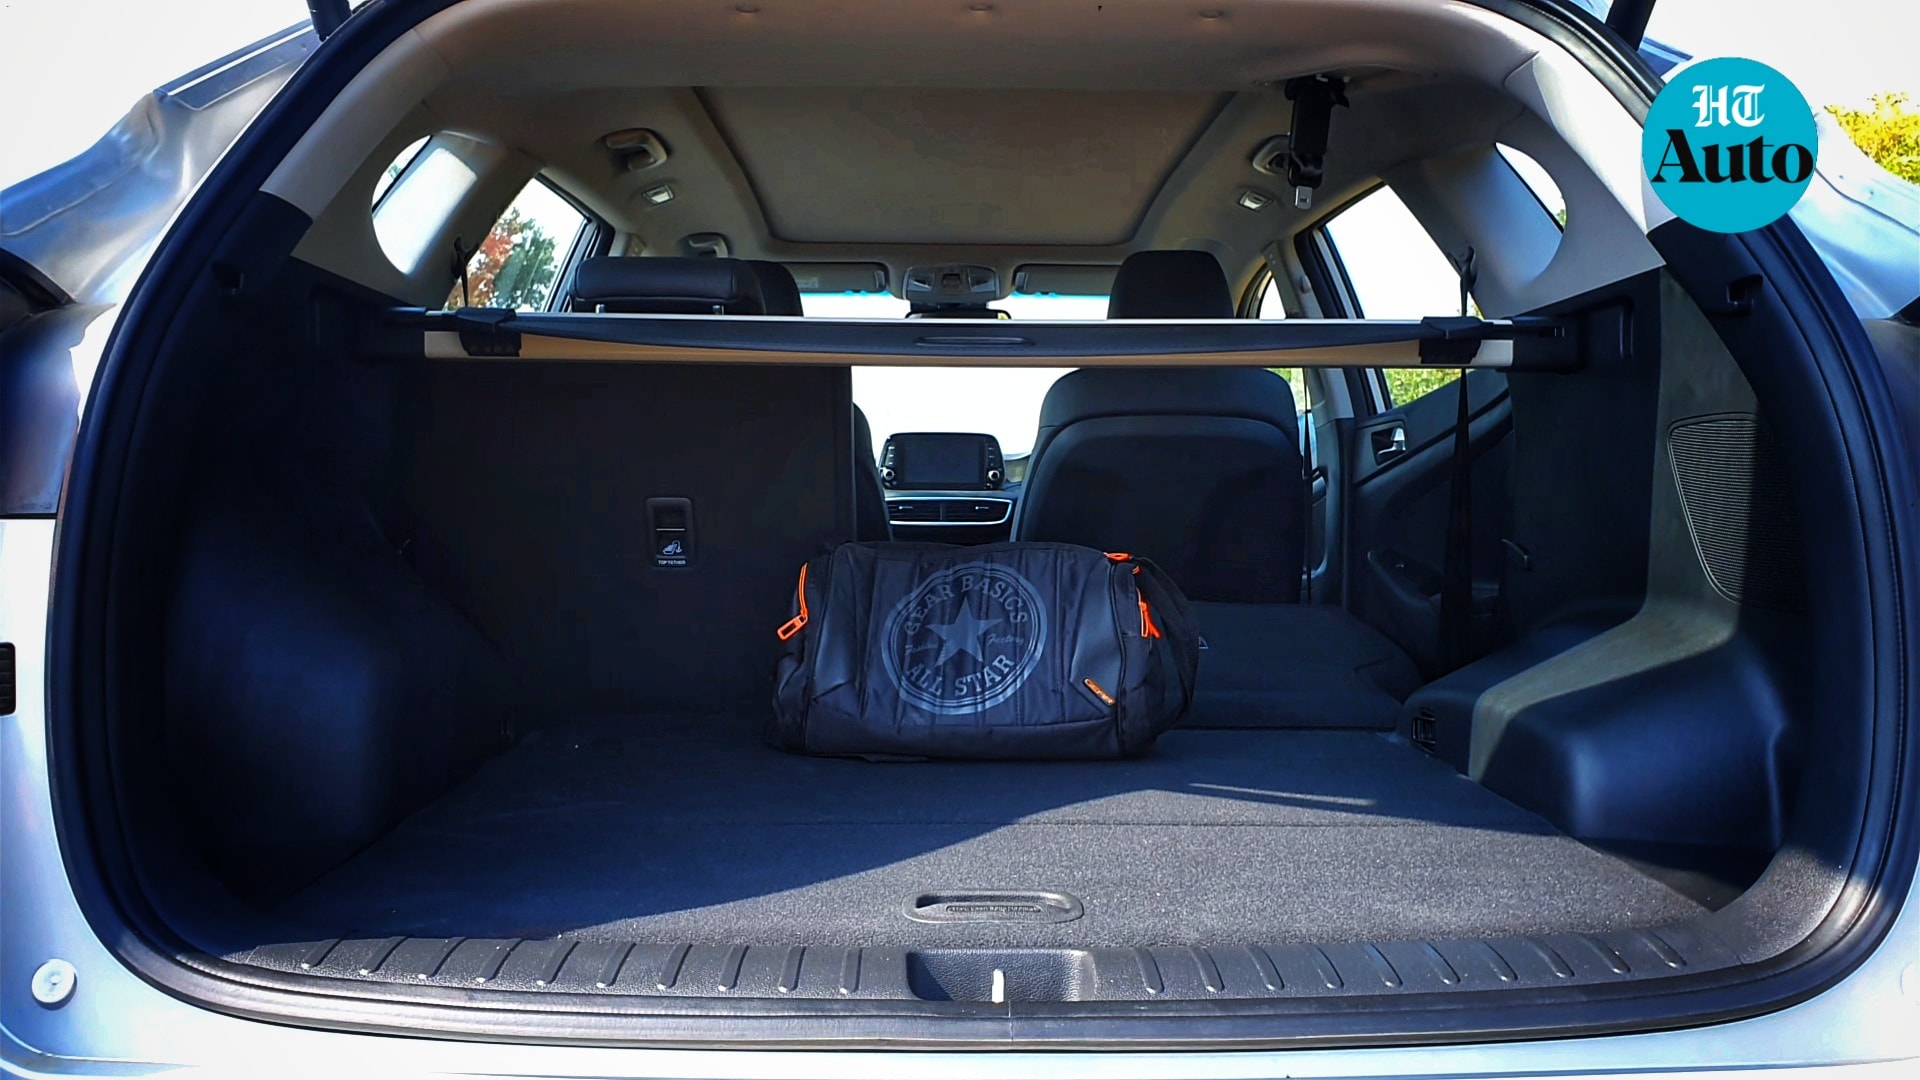 Tuscon offers 513 litres of boot space and the option to split fold the rear seats expands the storage space even further. (HT Auto/Sabyasachi Dasgupta)